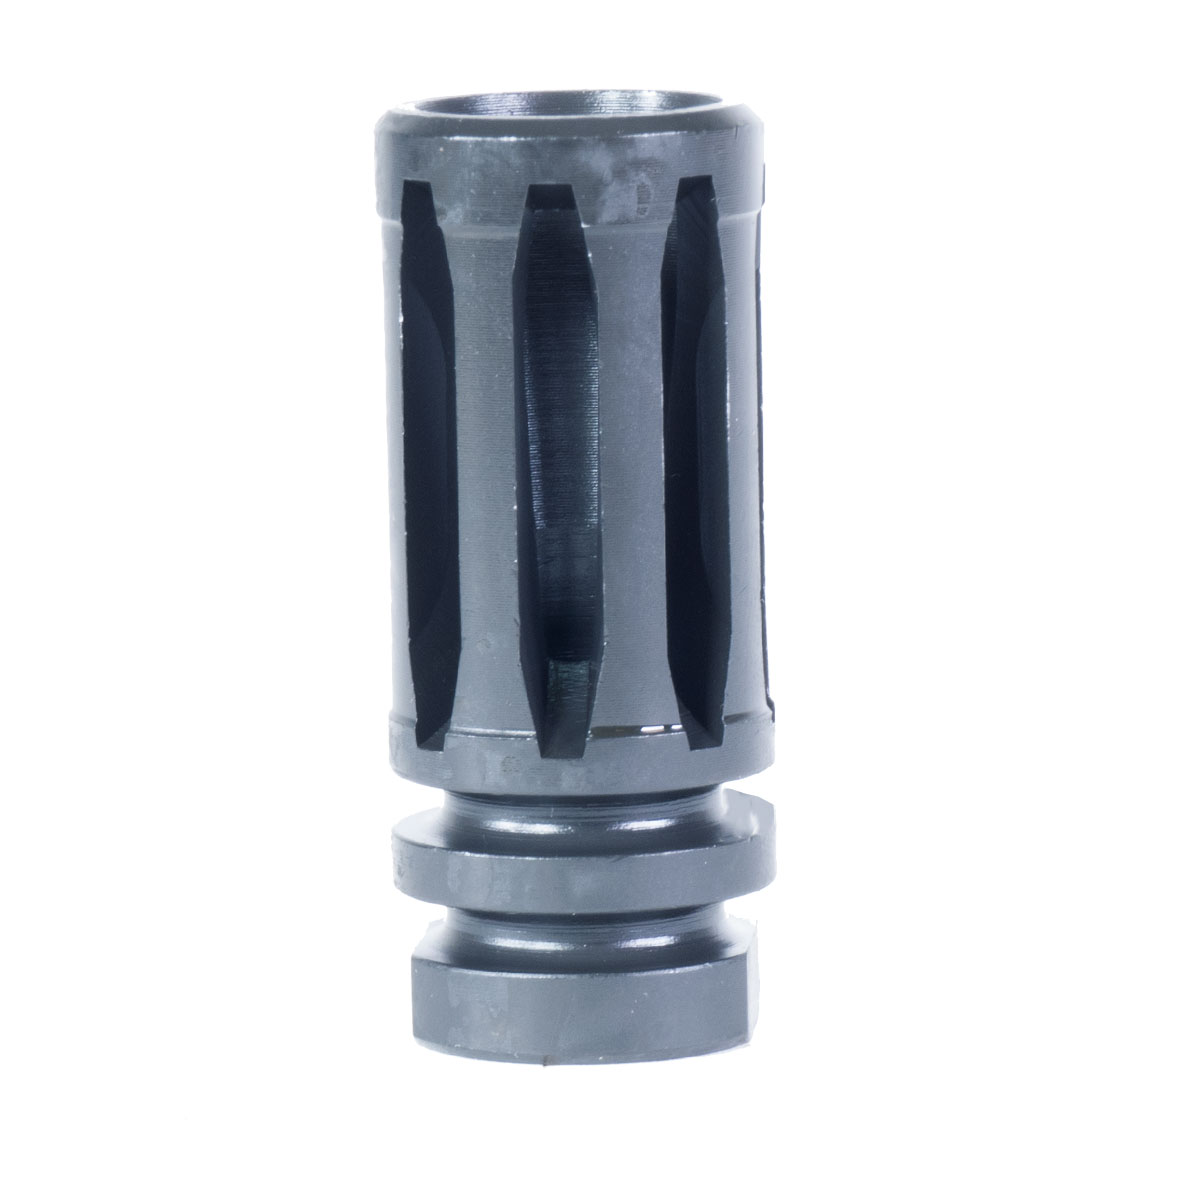 KAK Industry A2 Extended Flash Hider, 1/2x28, Pin and Weld Ready, Phosphate, A2 Style